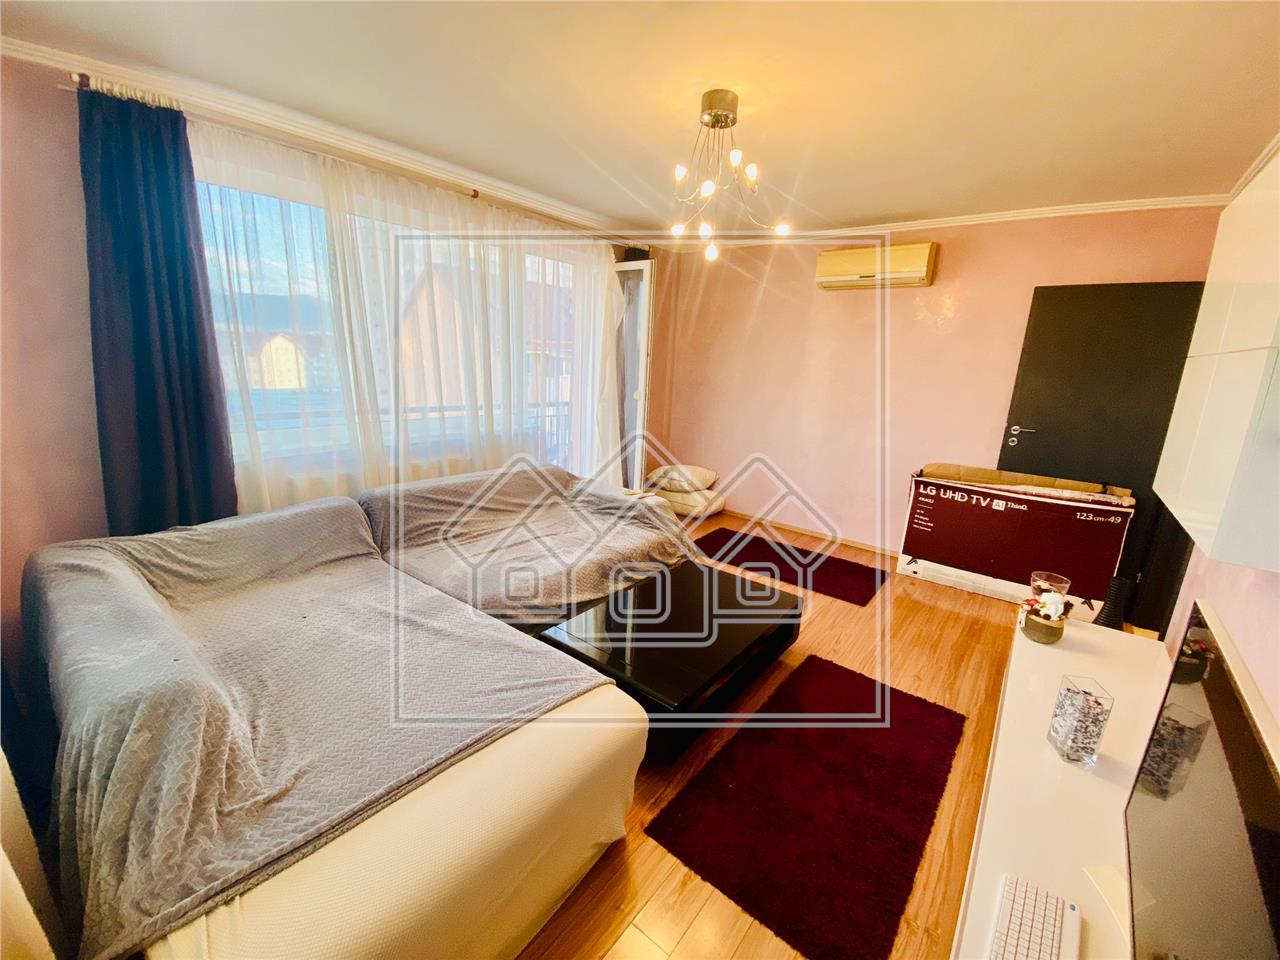 Apartment for sale in Sibiu - 2 rooms and balcony - Hippodrom III